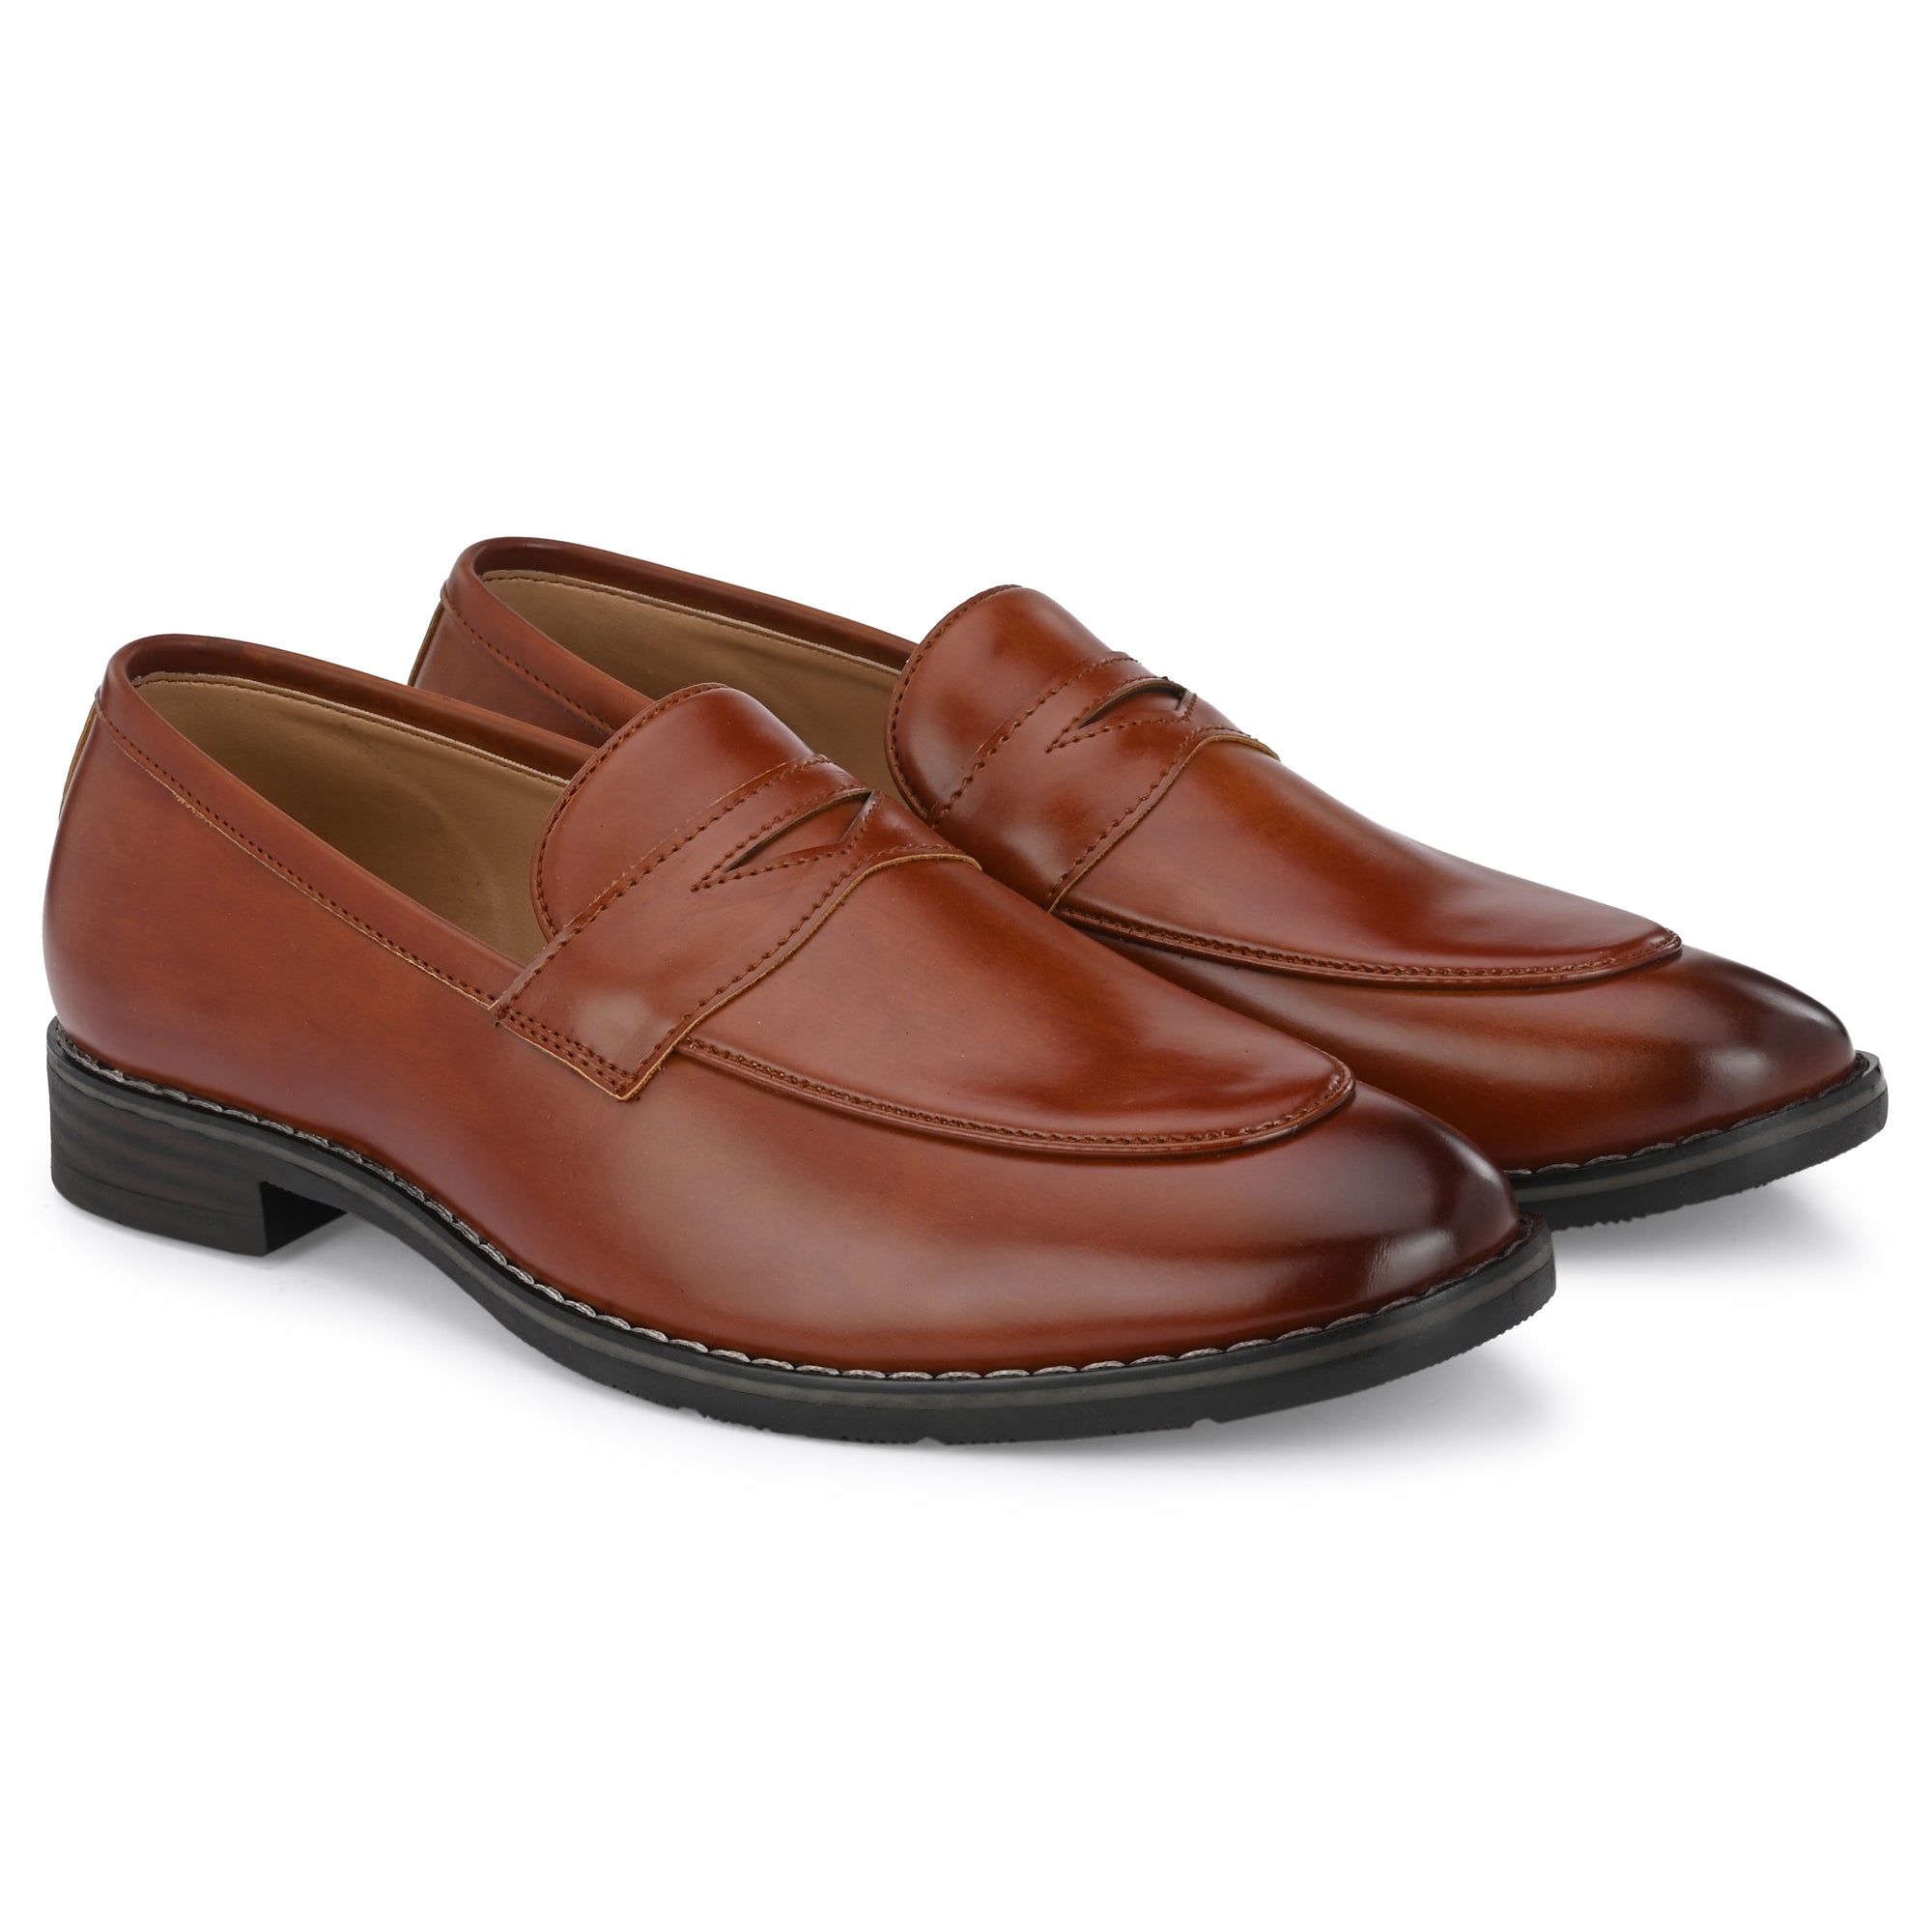 Loafers and Moccasins Collection for Men